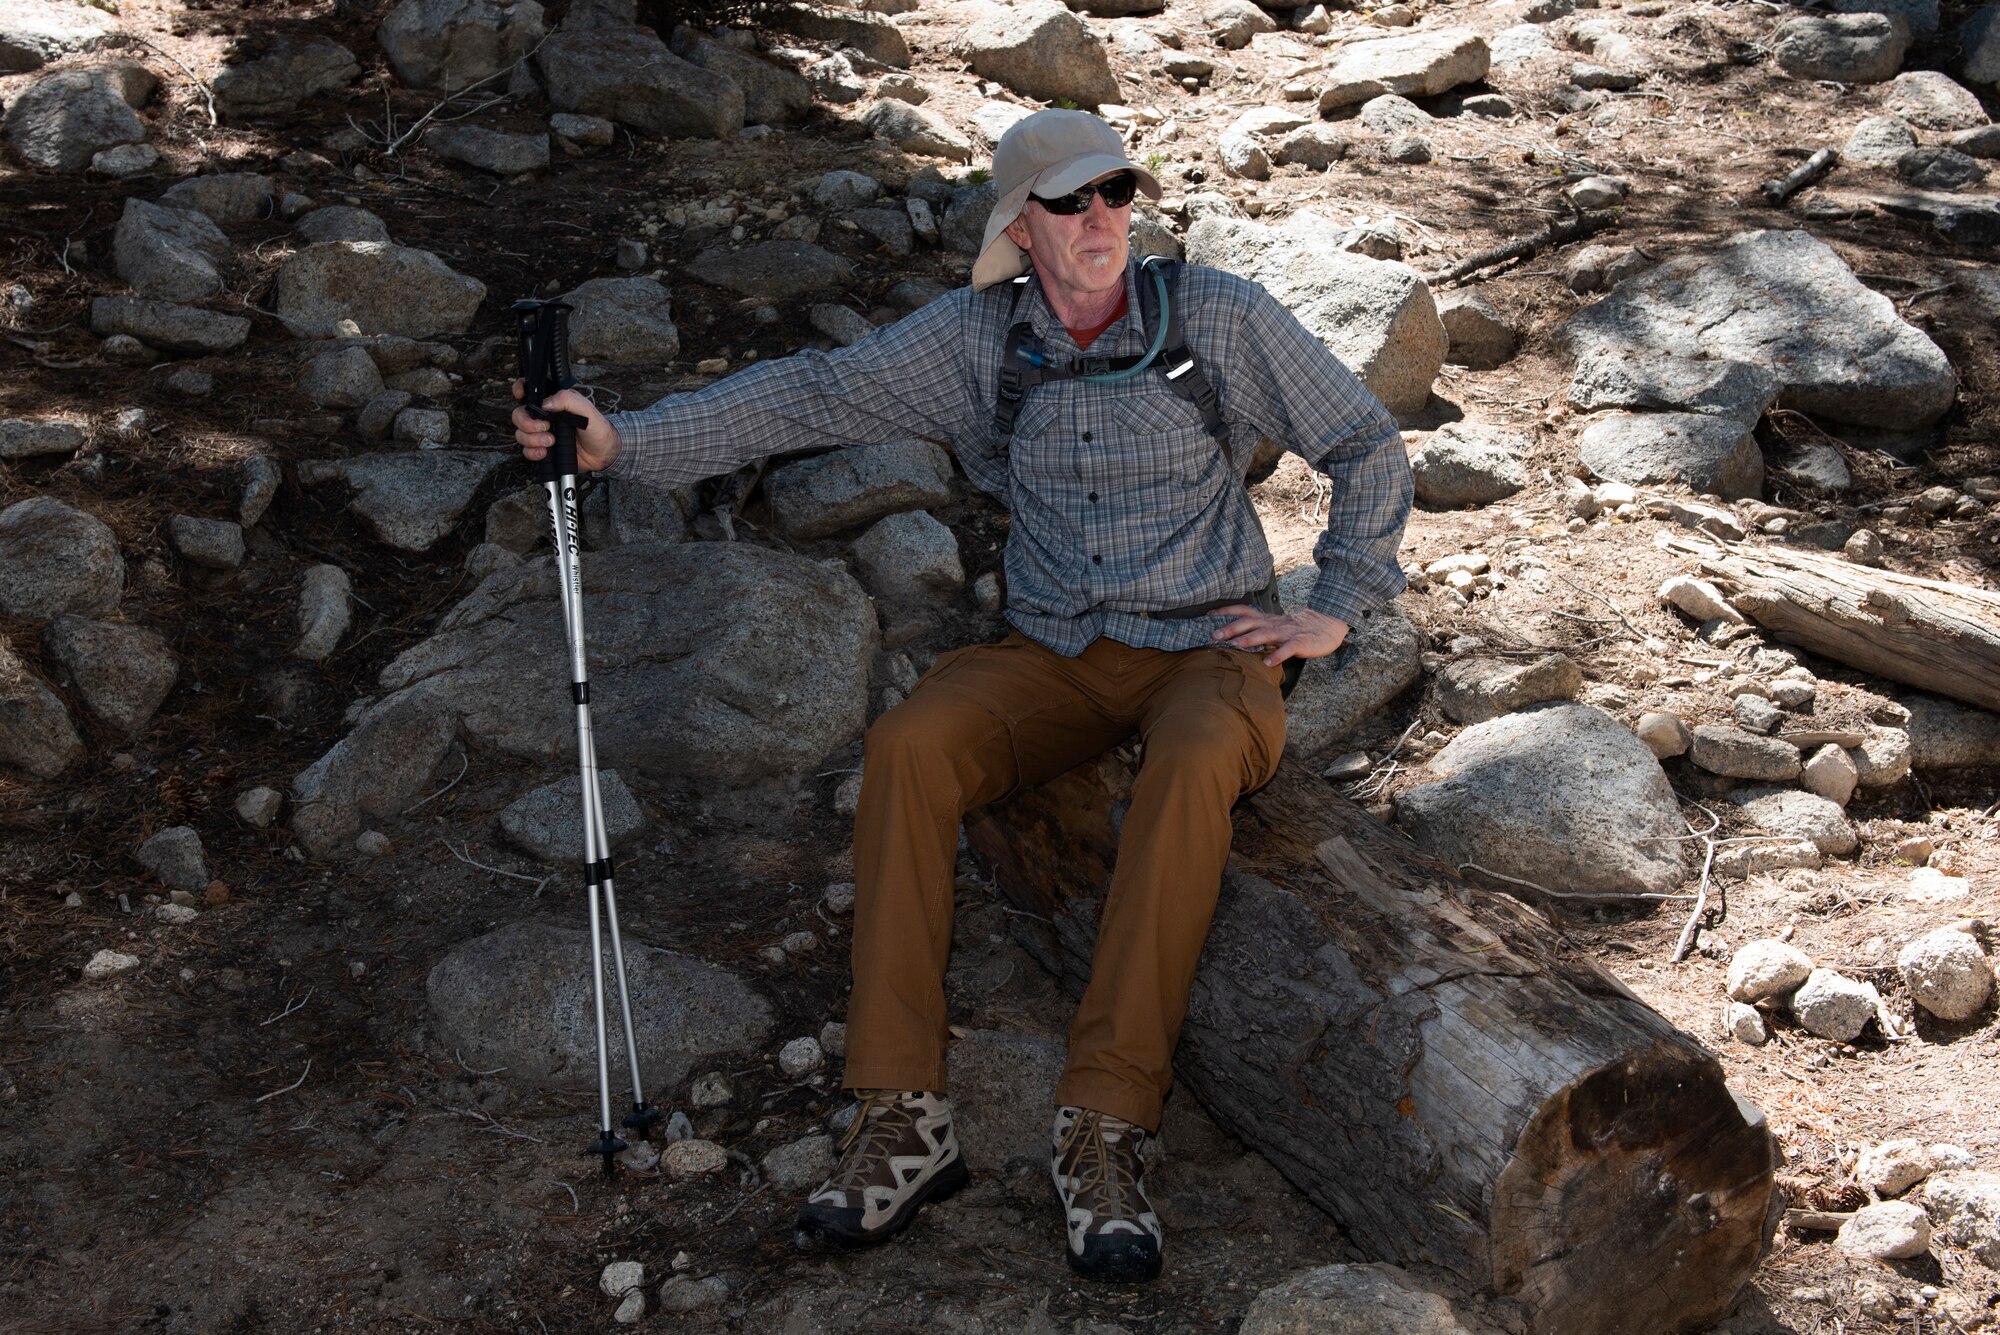 Retired U.S. Air Force Master Sgt. Terry Hendricksen, 60th Force Support Squadron outdoor recreation equipment repair technician, takes a break from hiking July 13, 2019, at Yosemite National Park, California. Hendricksen joined nearly four dozen Airmen from Travis Air Force Base, California, to hike to Cloud’s Rest covering 14.57 miles as they climbed to 9,926 feet above sea level. The hike was organized to enhance the Airmen’s physical, mental and spiritual resiliency. (U.S. Air Fore photo by Tech. Sgt. James Hodgman)